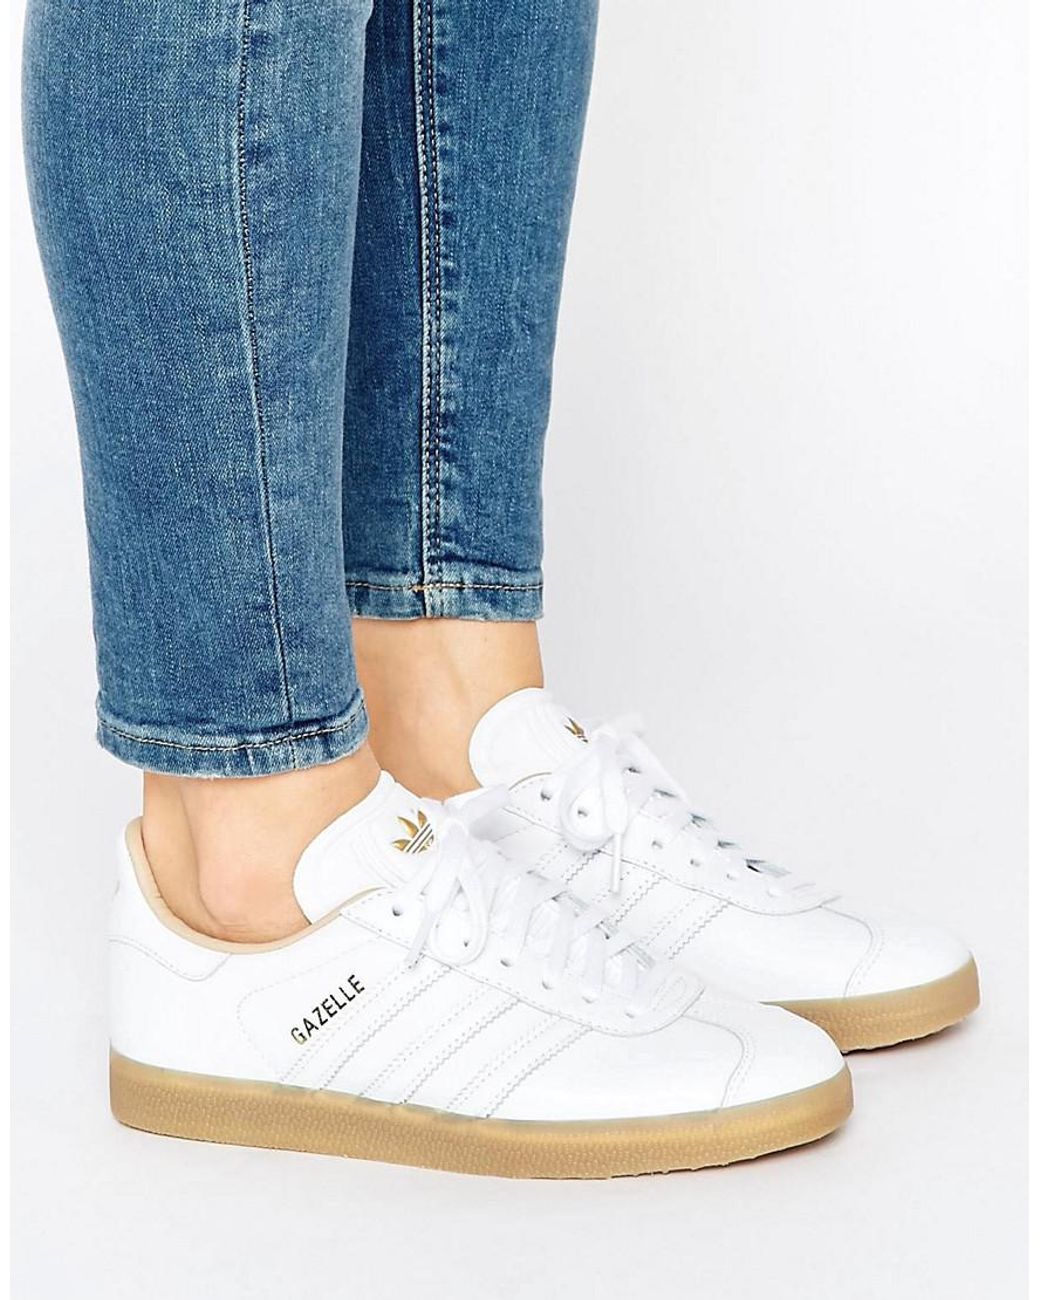 adidas Originals White Leather Gazelle Sneakers With Gum Sole for Men | Lyst